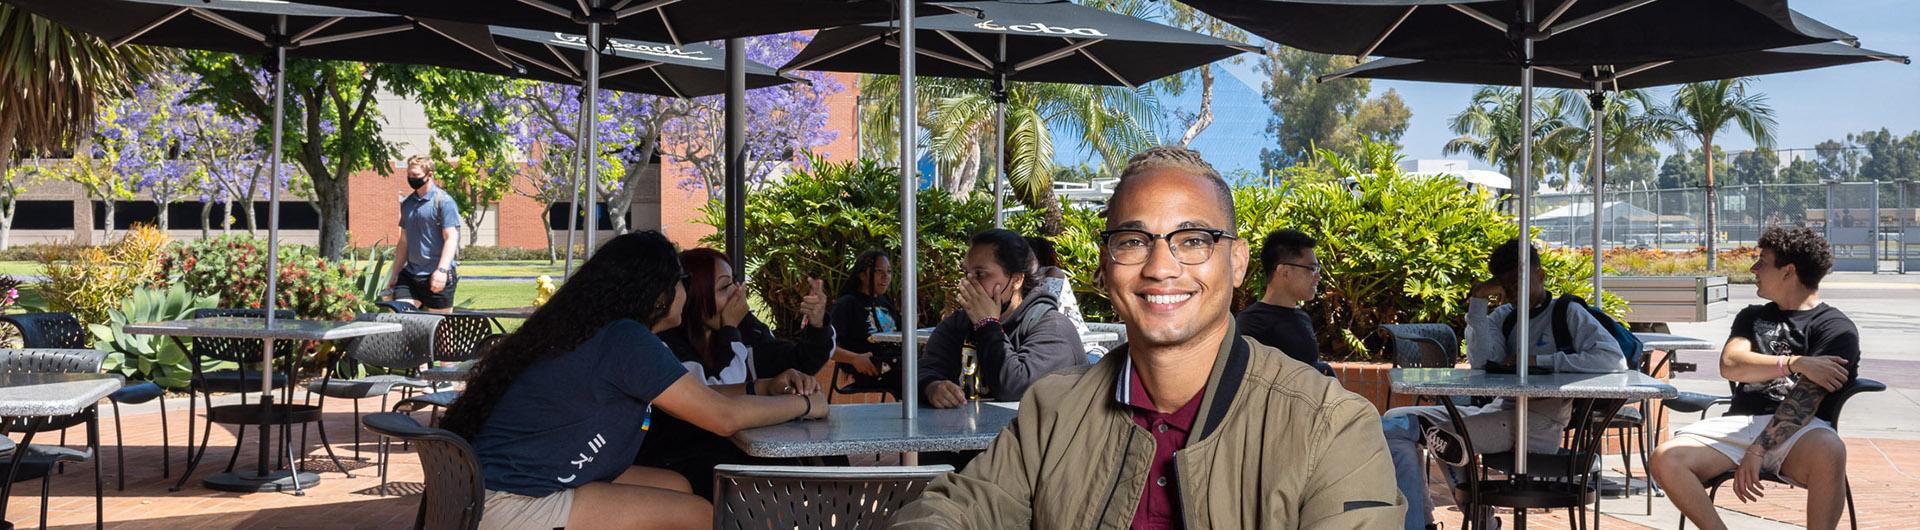 CSULB alumnus Austin Metoyer sits at a picnic table and smiles at the camera.